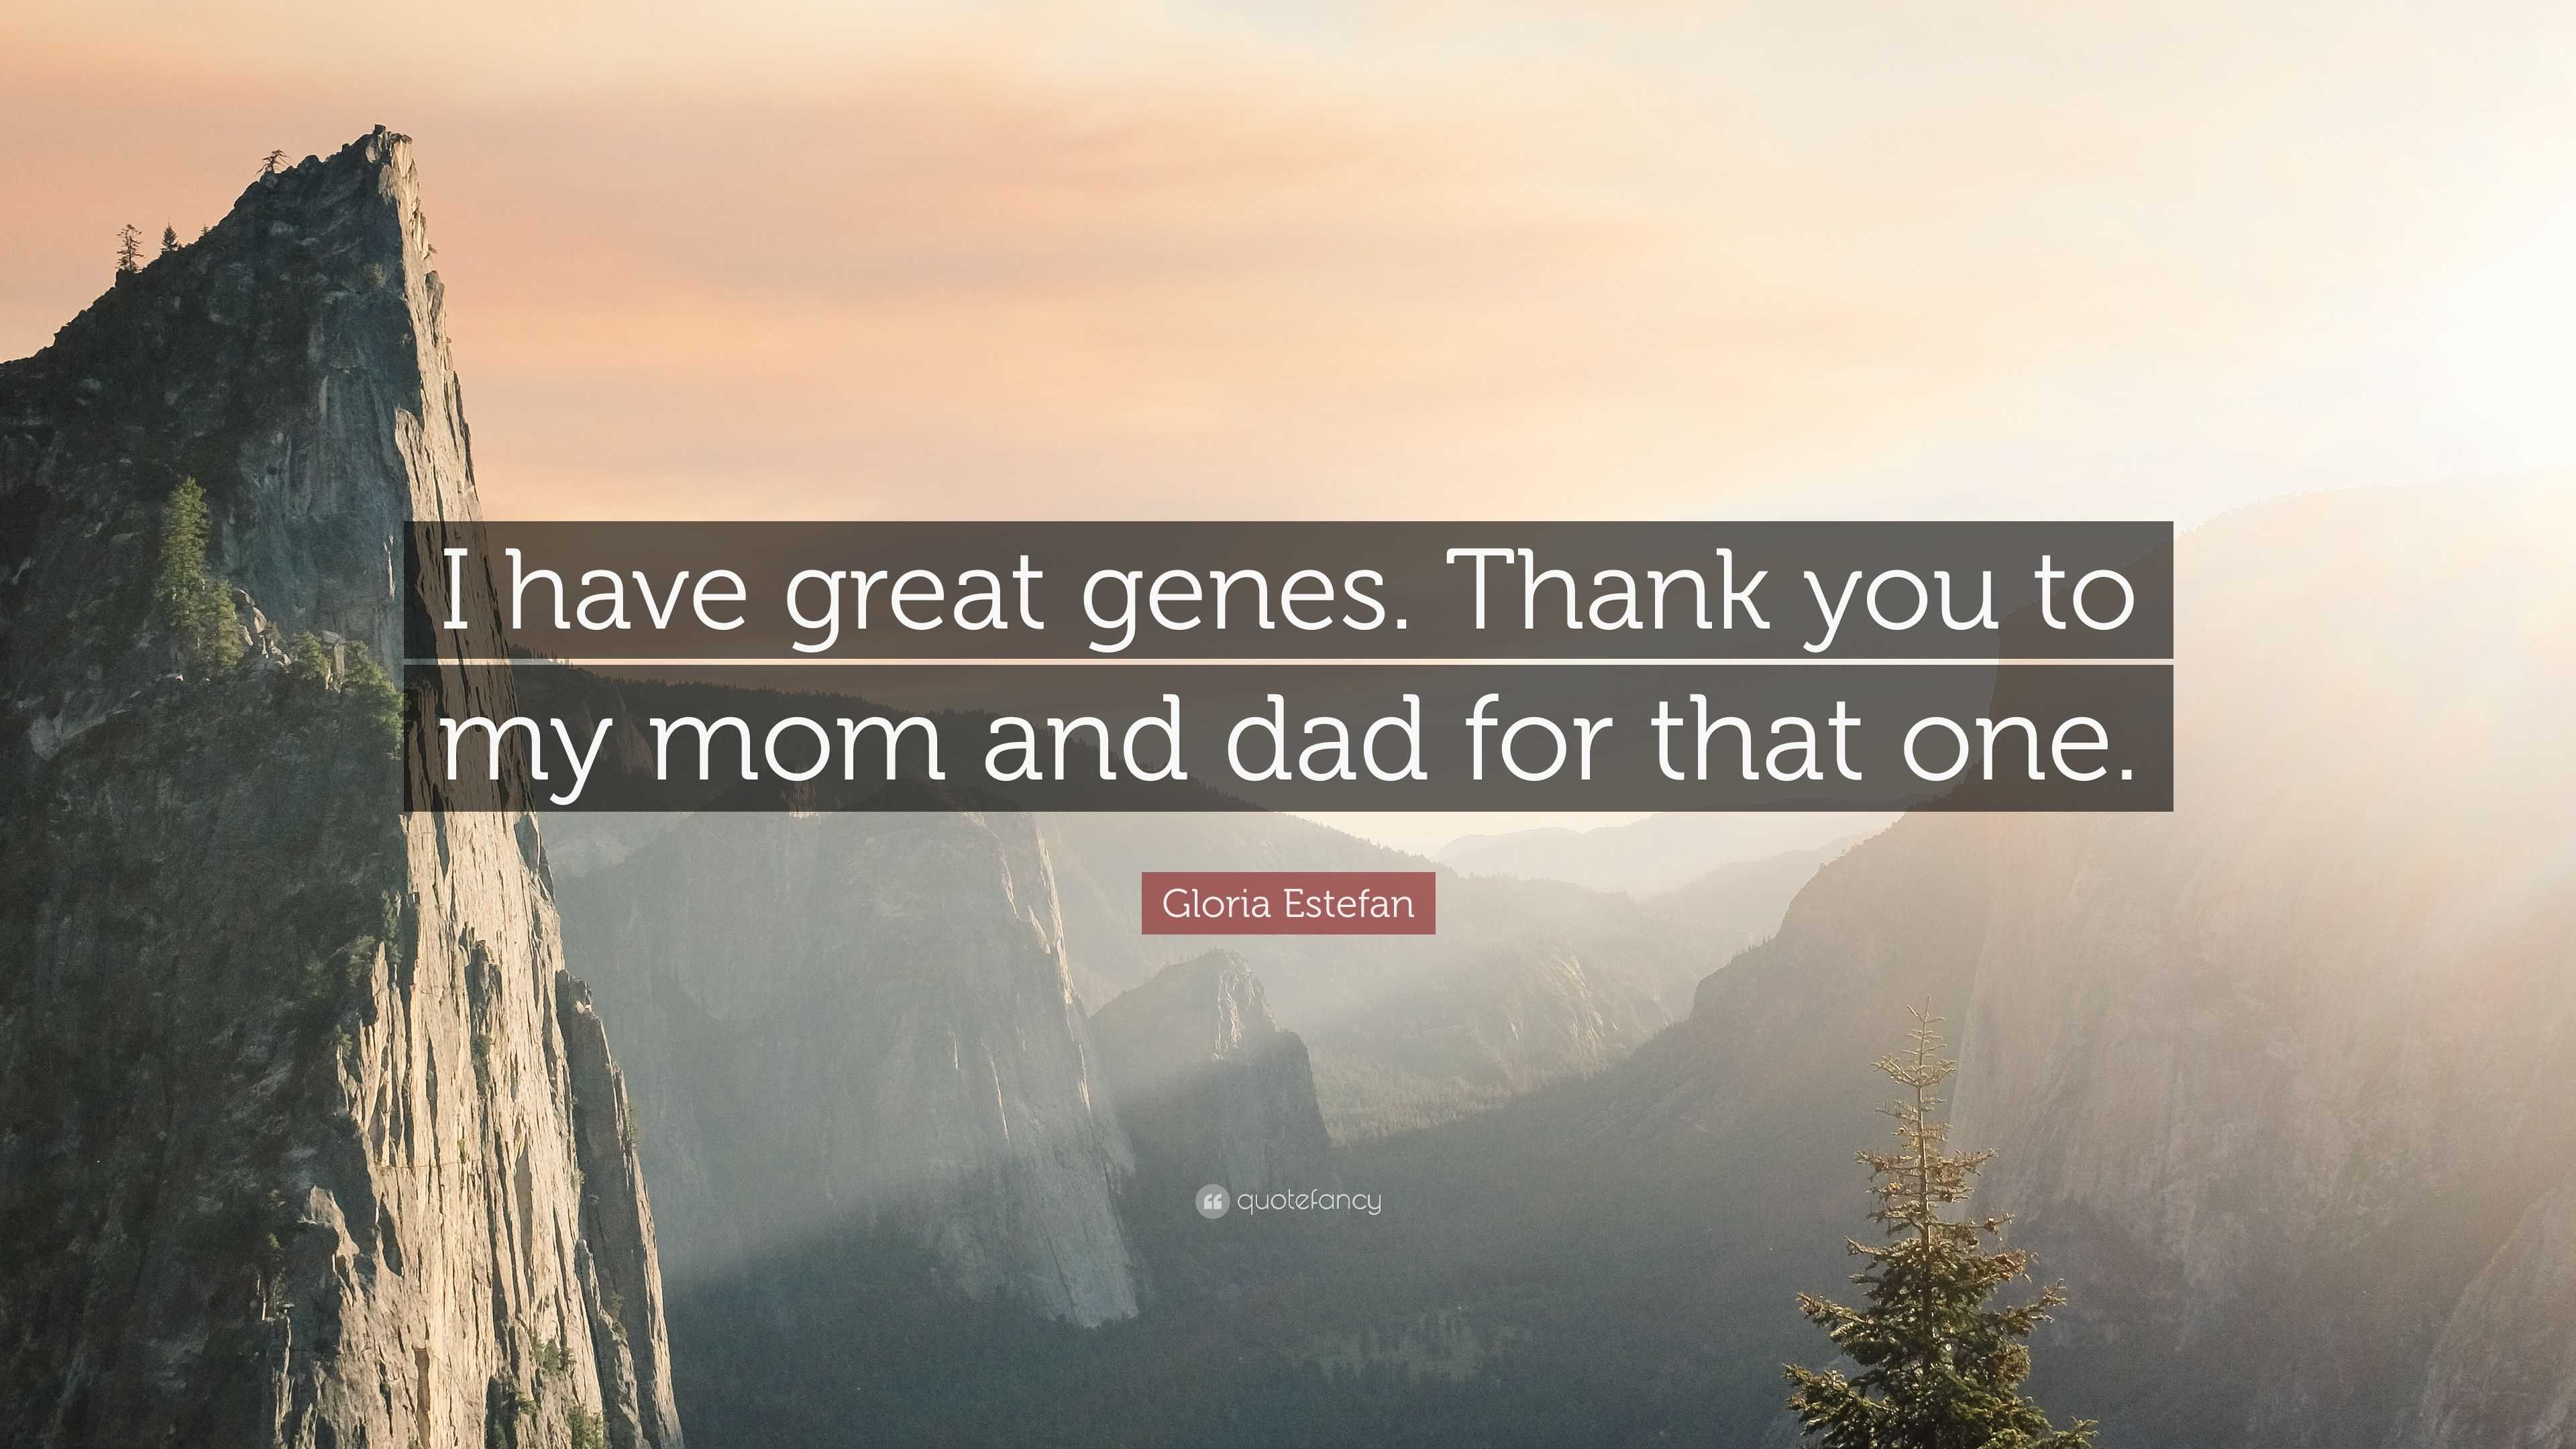 thank you mom and dad for everything quotes